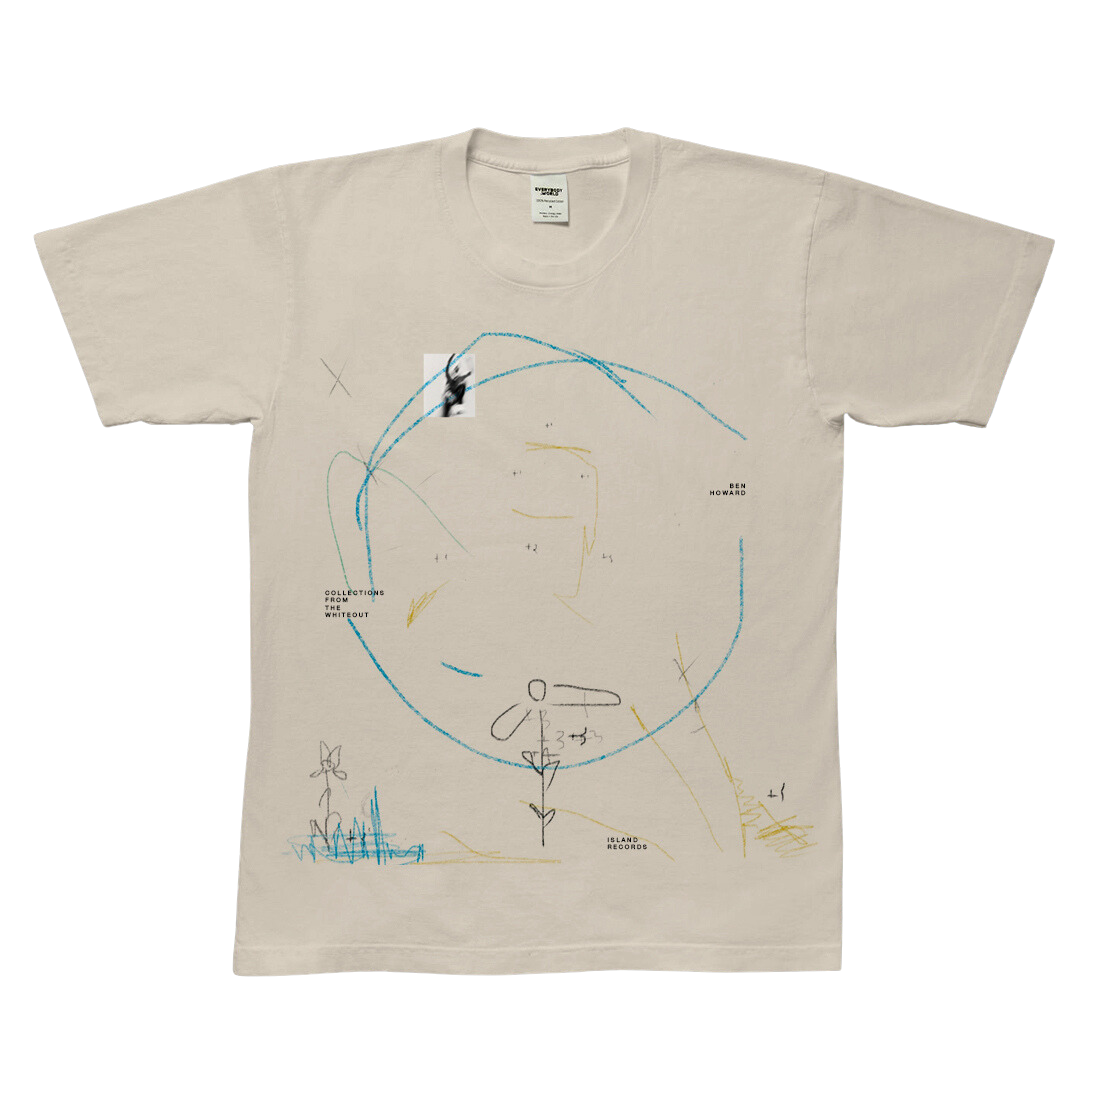 Ben Howard - Collections From The Whiteout: Graphic Tee (Sand)